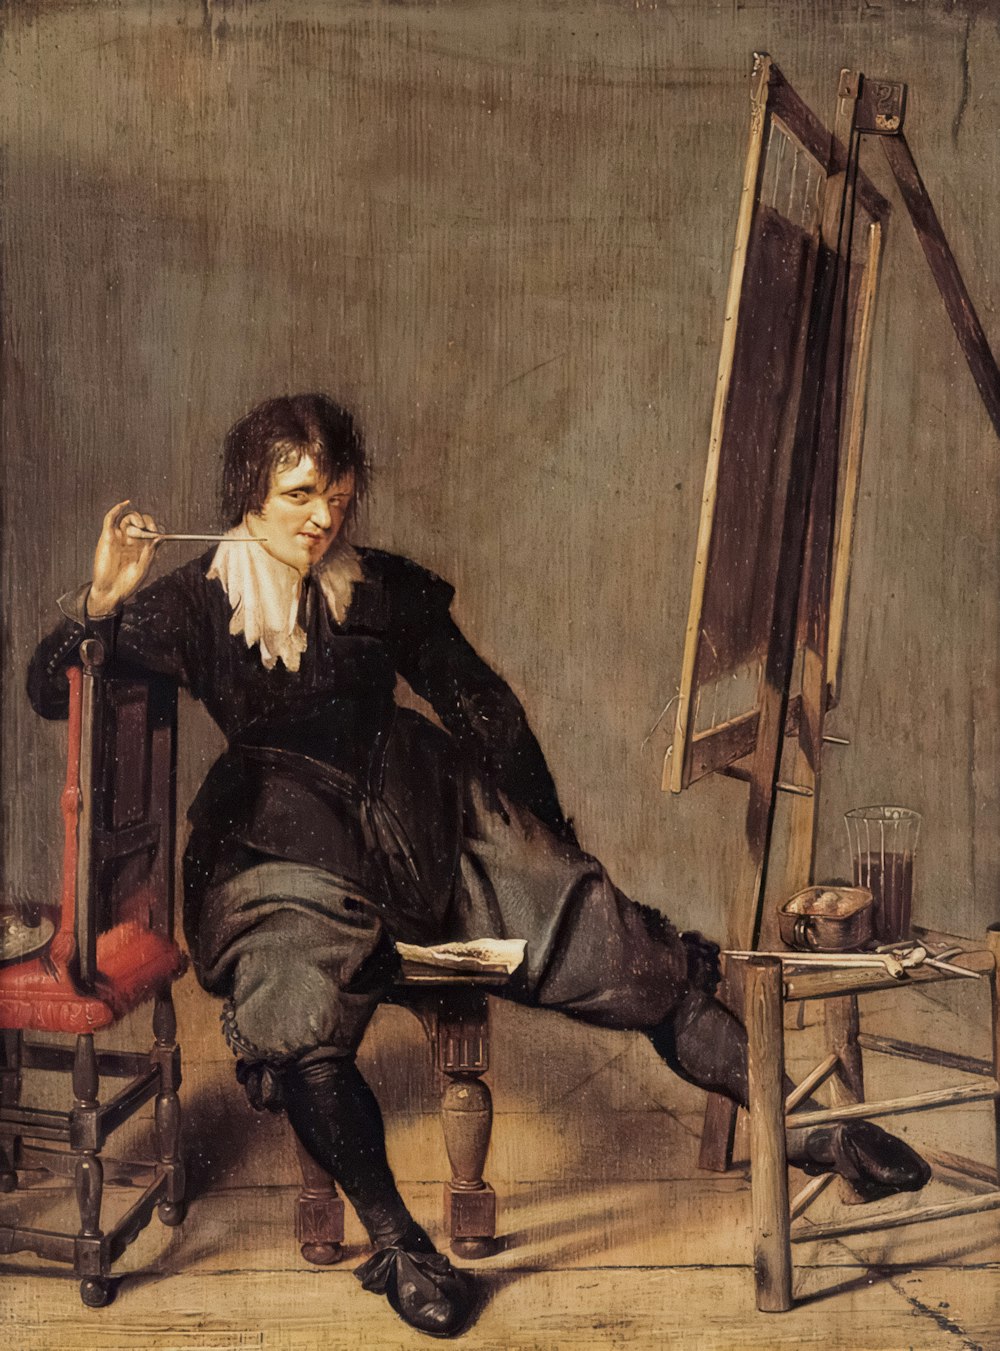 a painting of a man sitting in front of a easel